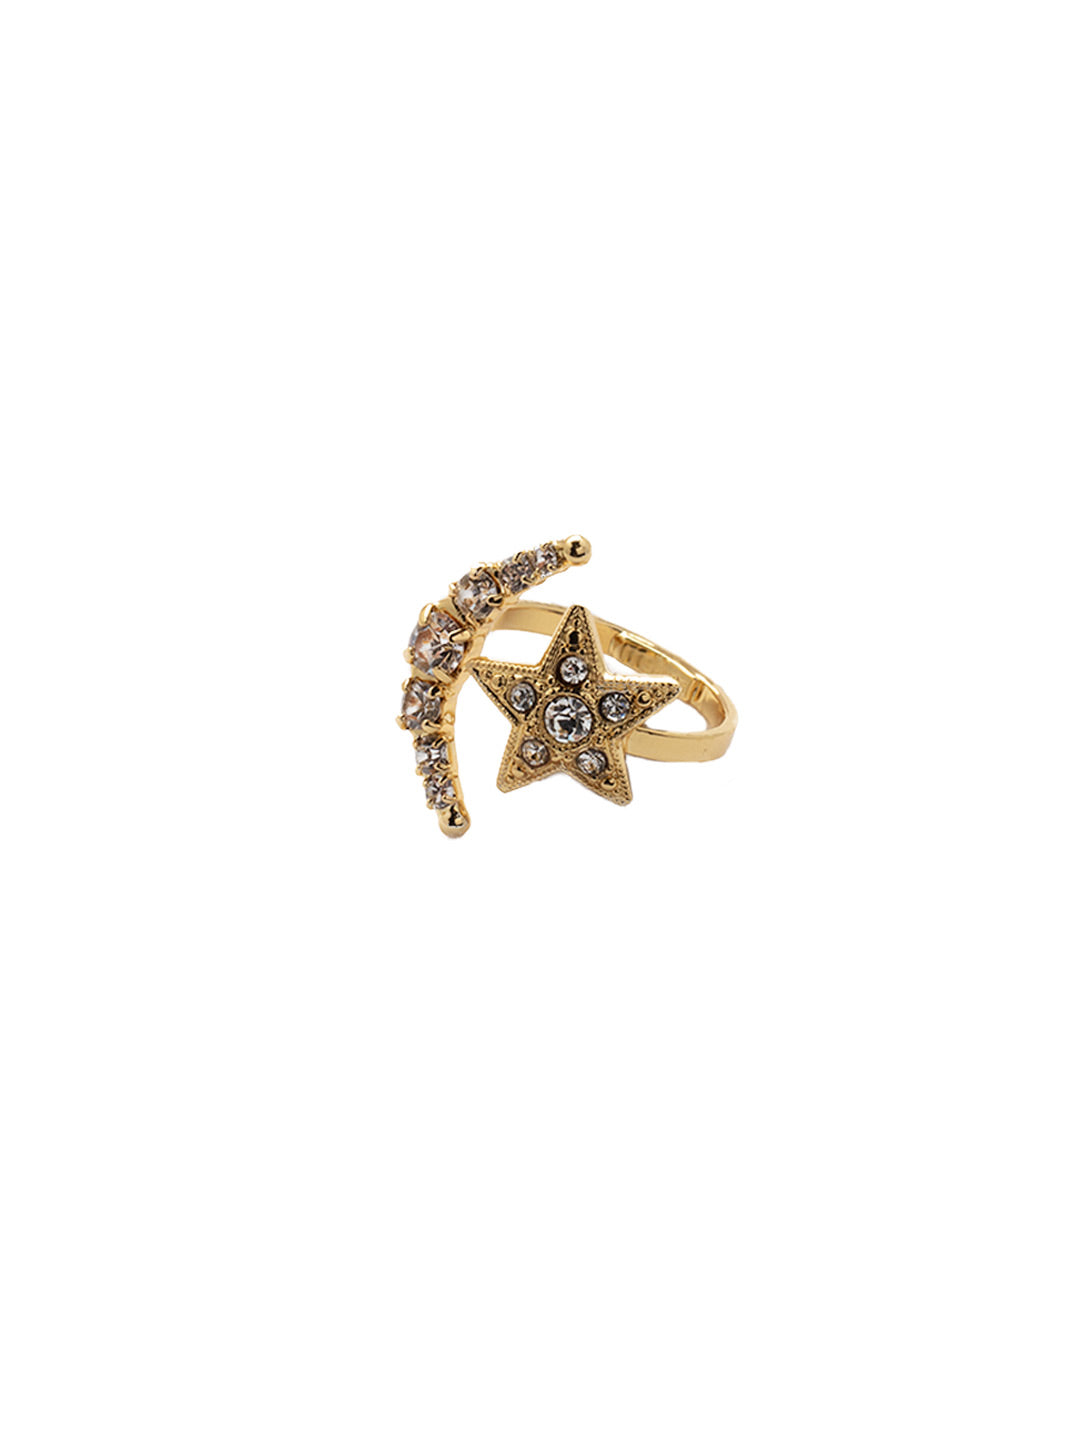 Nebula Statement Ring - 4REZ20BGCRY - <p>The Nebula Statement Ring is an out-of-this-world celestial wardrobe must-have! An adjustable thin band lays base to one crystal studded half crescent moon and star at either end of the open band. From Sorrelli's Crystal collection in our Bright Gold-tone finish.</p>